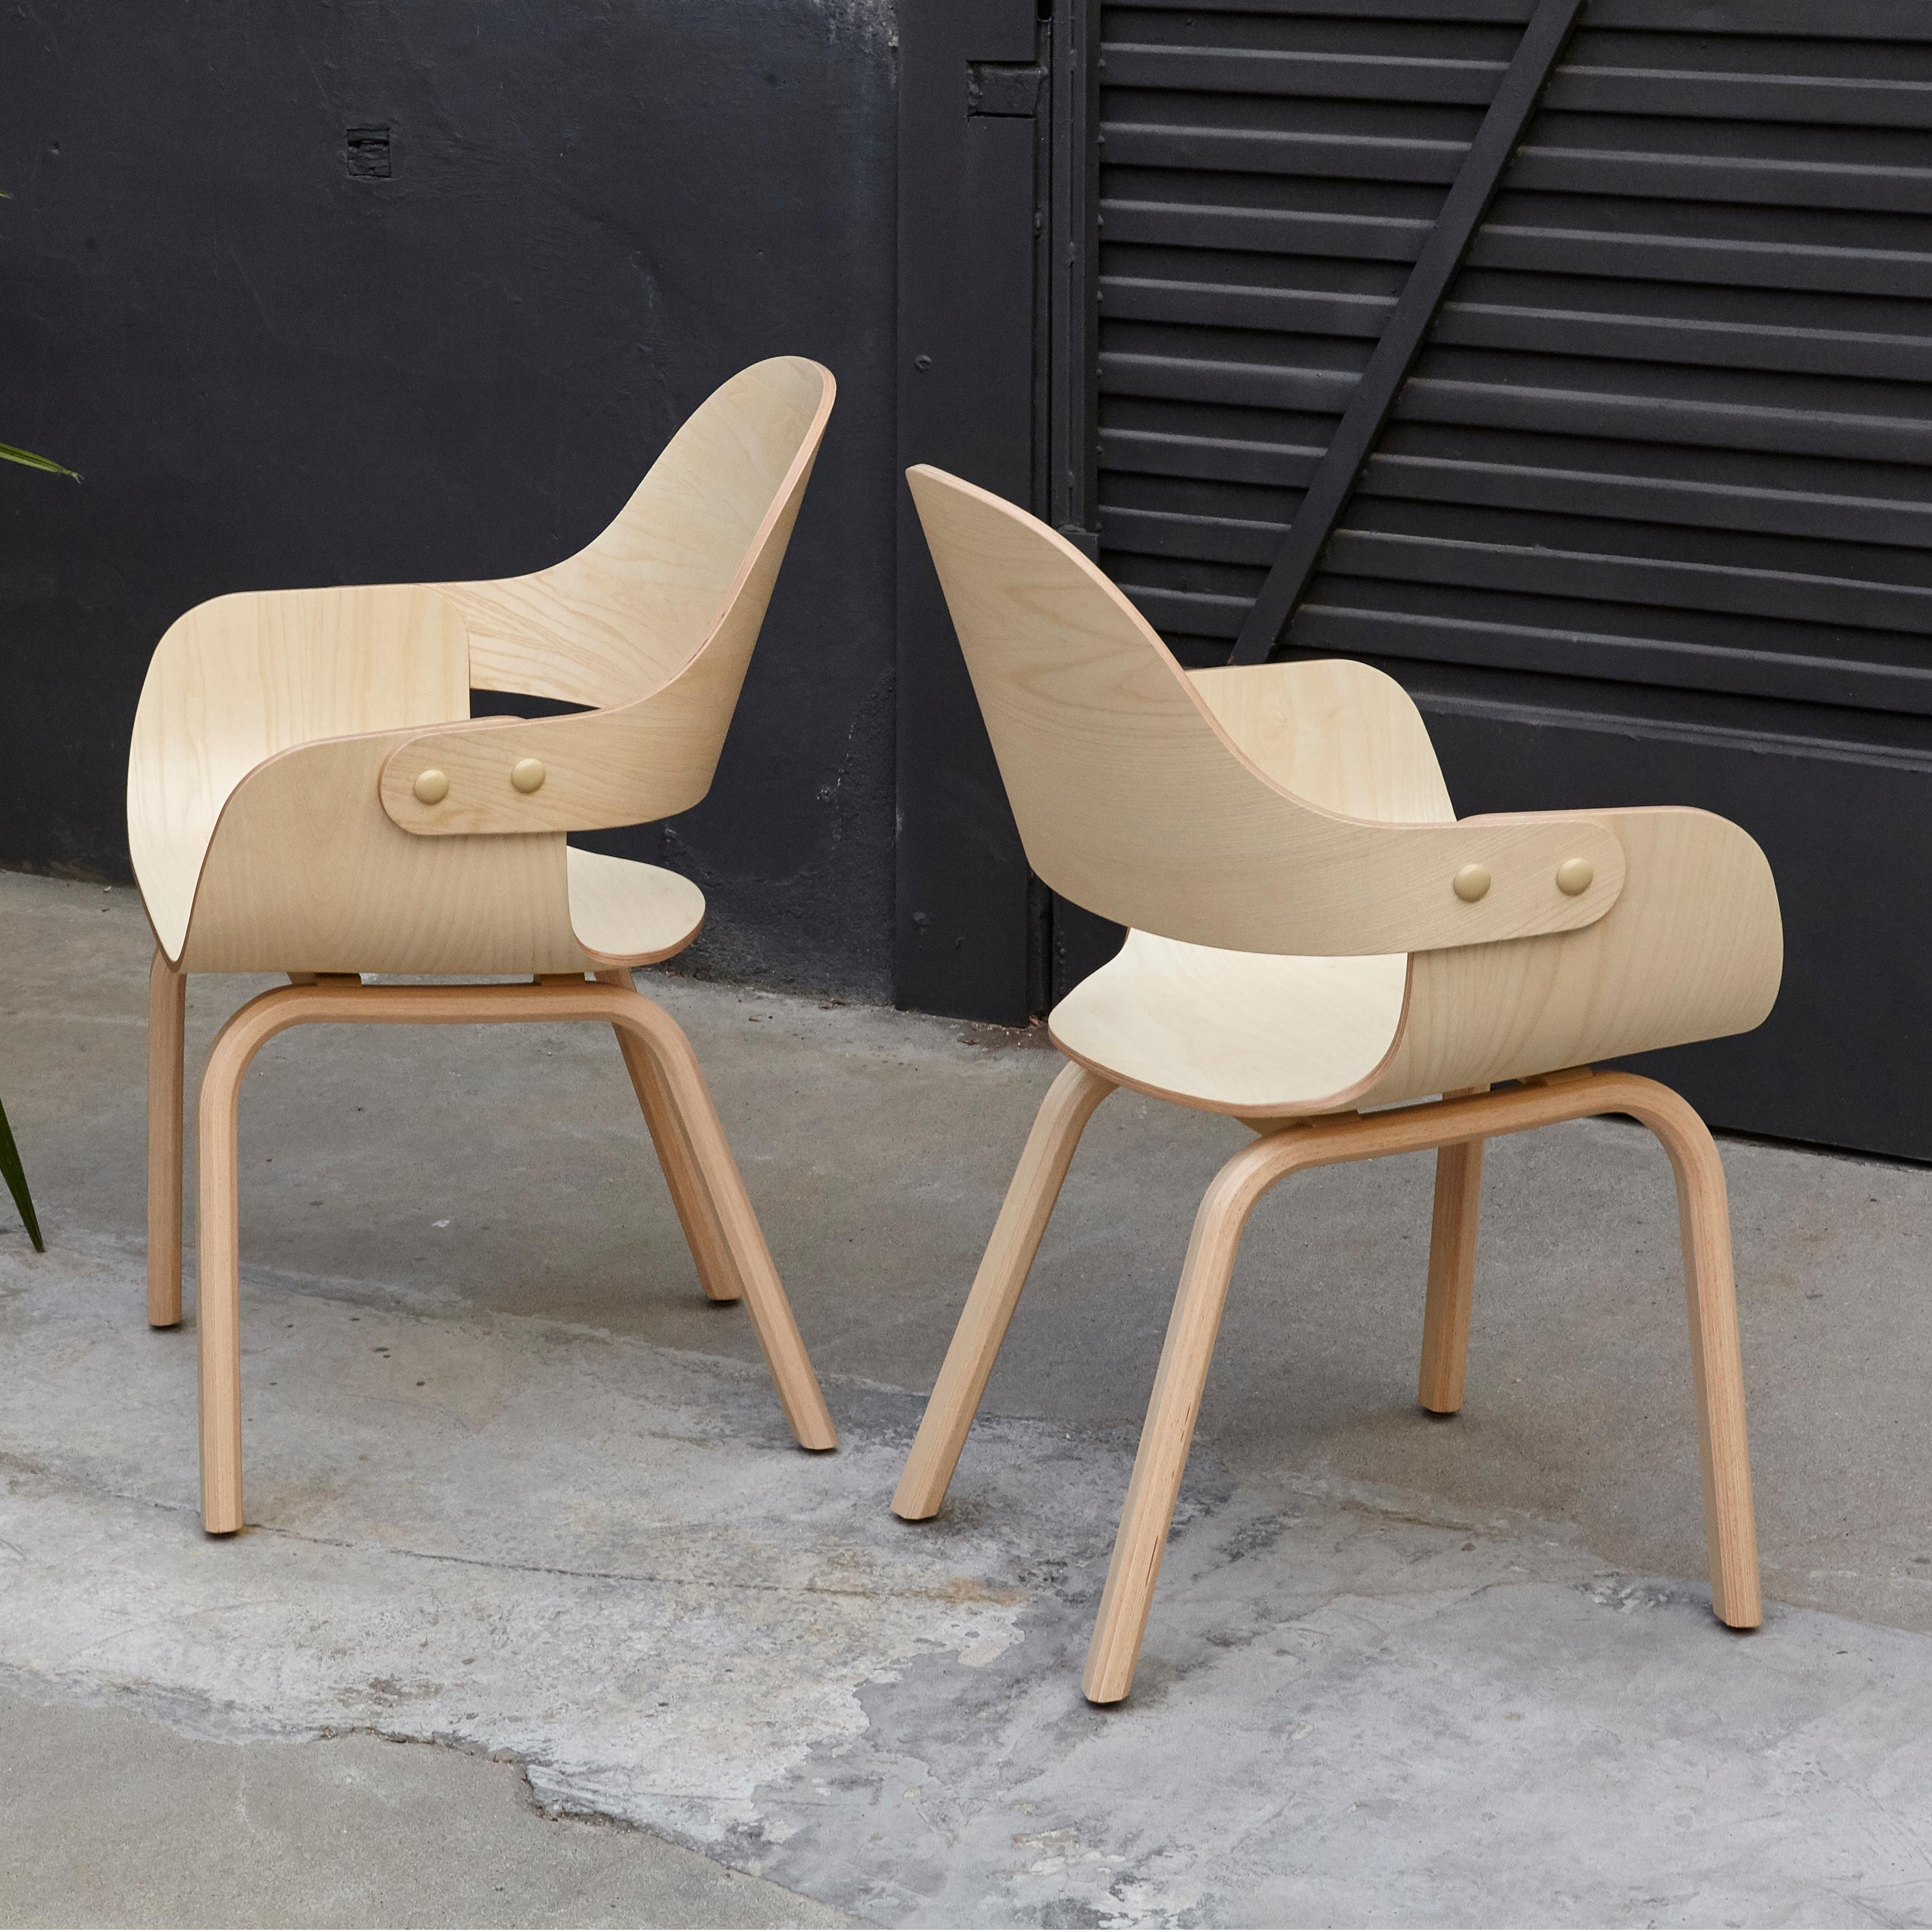 Design by Jaime Hayon, 2007
Manufactured by BD Barcelona.

Measures: 52 x 55 x H.86 cm.
Seat and backrest in plywood.

In original condition, with minor wear consistent with age and use, preserving a beautiful patina.



